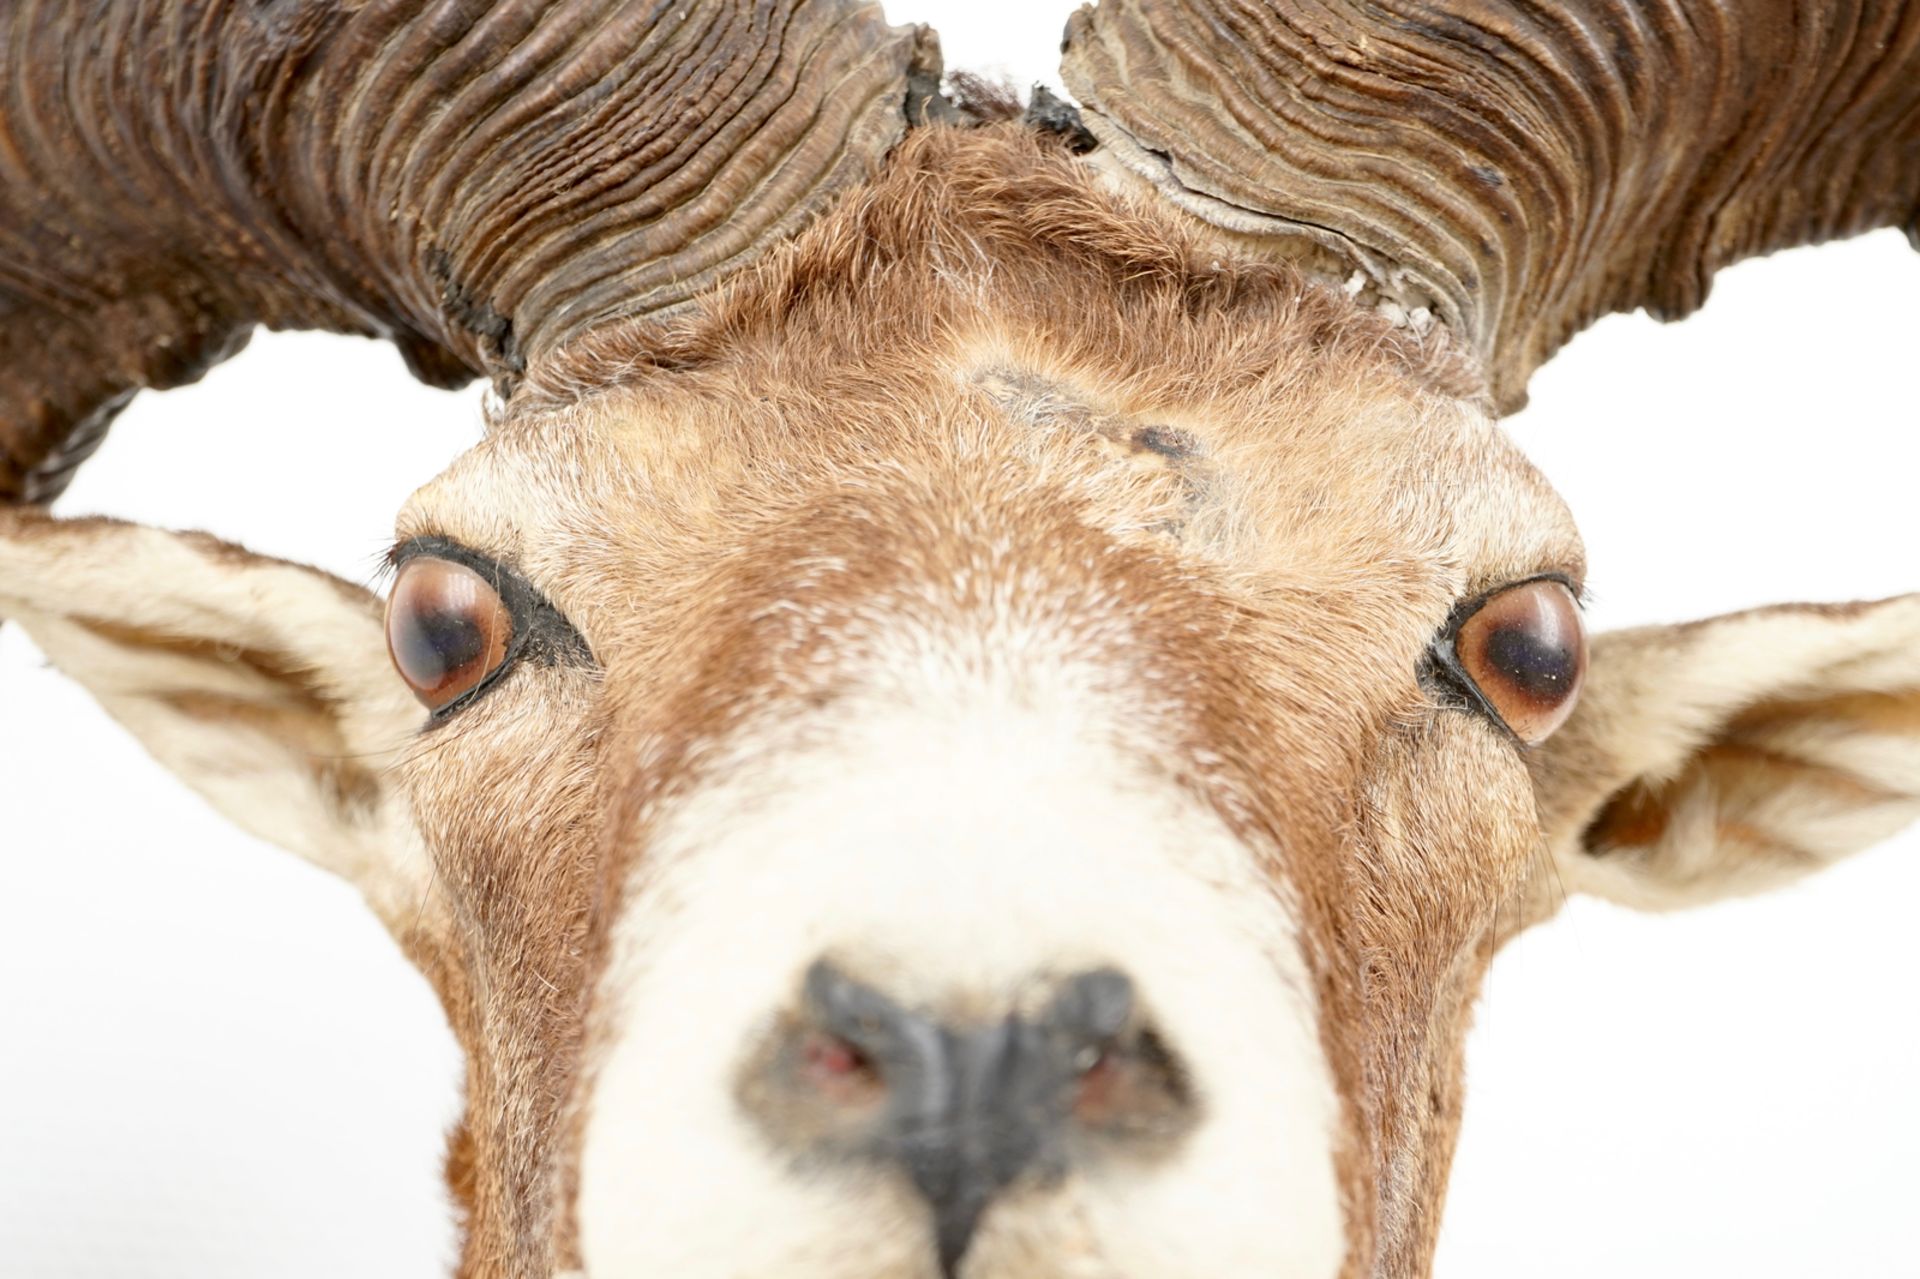 A bust of a mouflon, mounted on wood, taxidermy, late 20th C. L.: 44 cm - H.: 55 cm Condition - Image 7 of 7